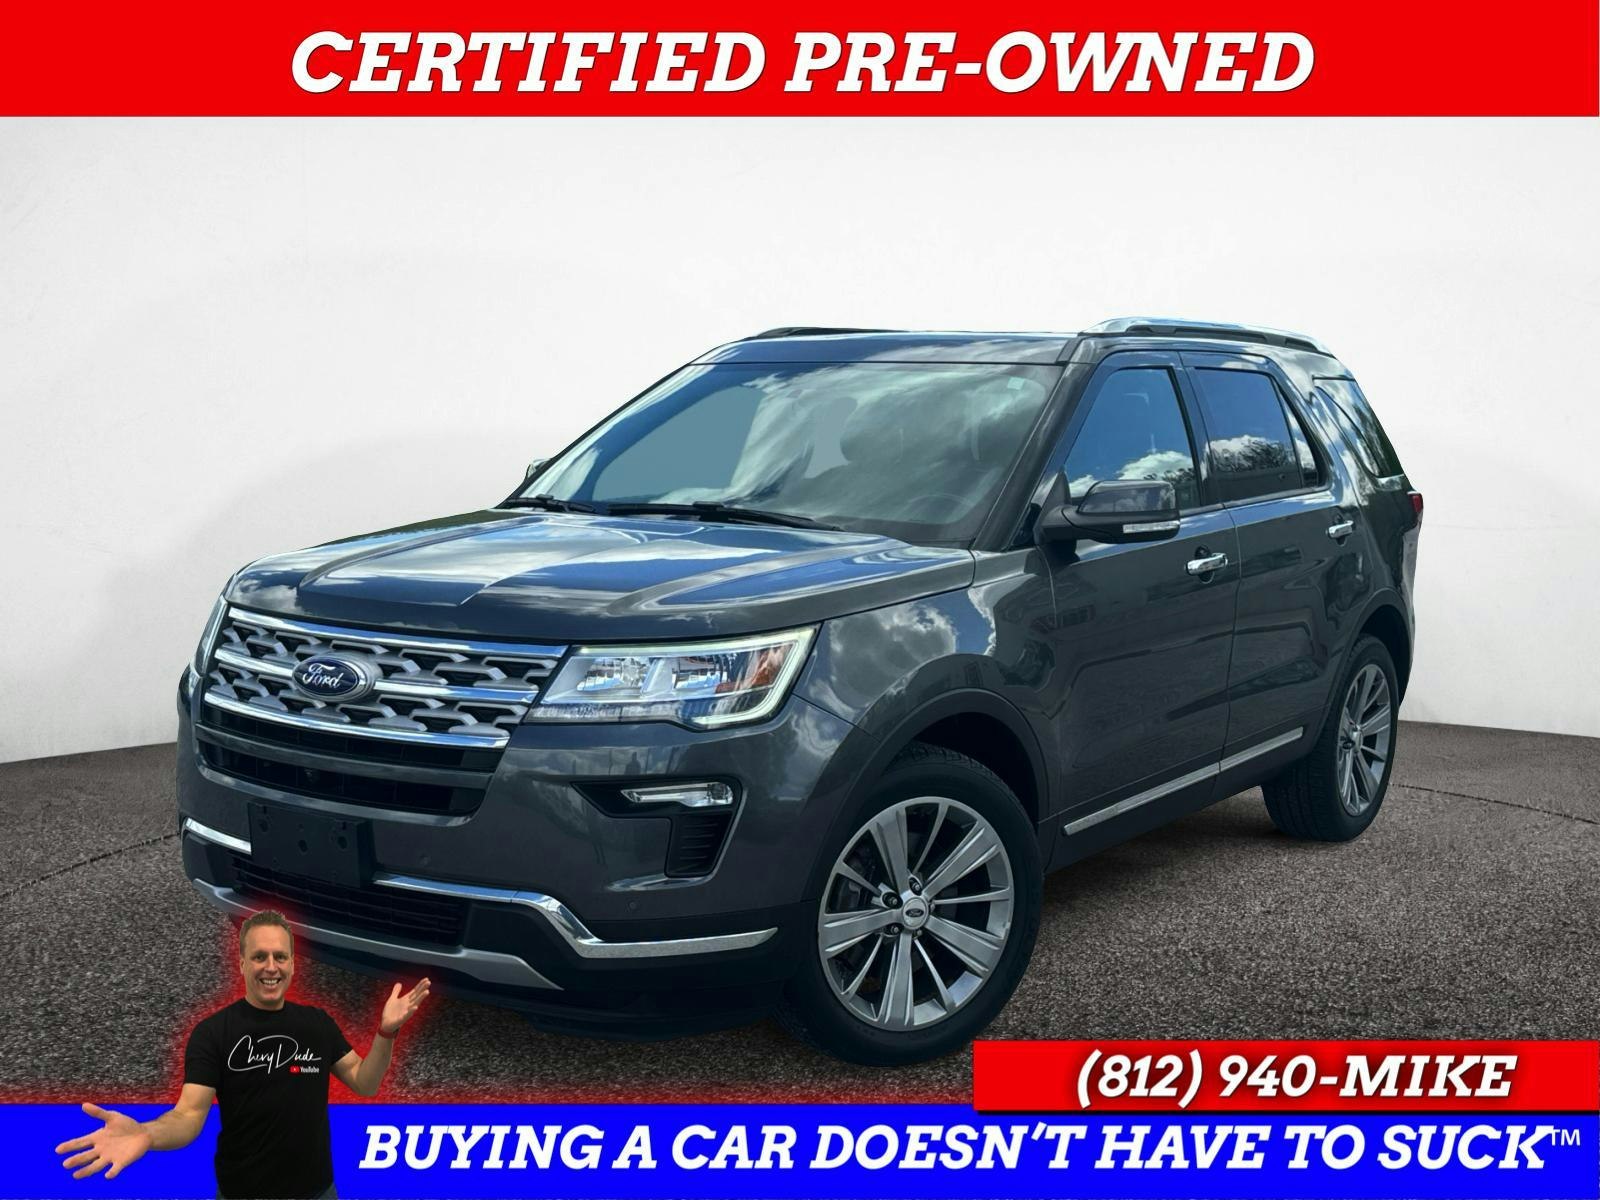 2018 Ford Explorer Limited (P1387) Main Image